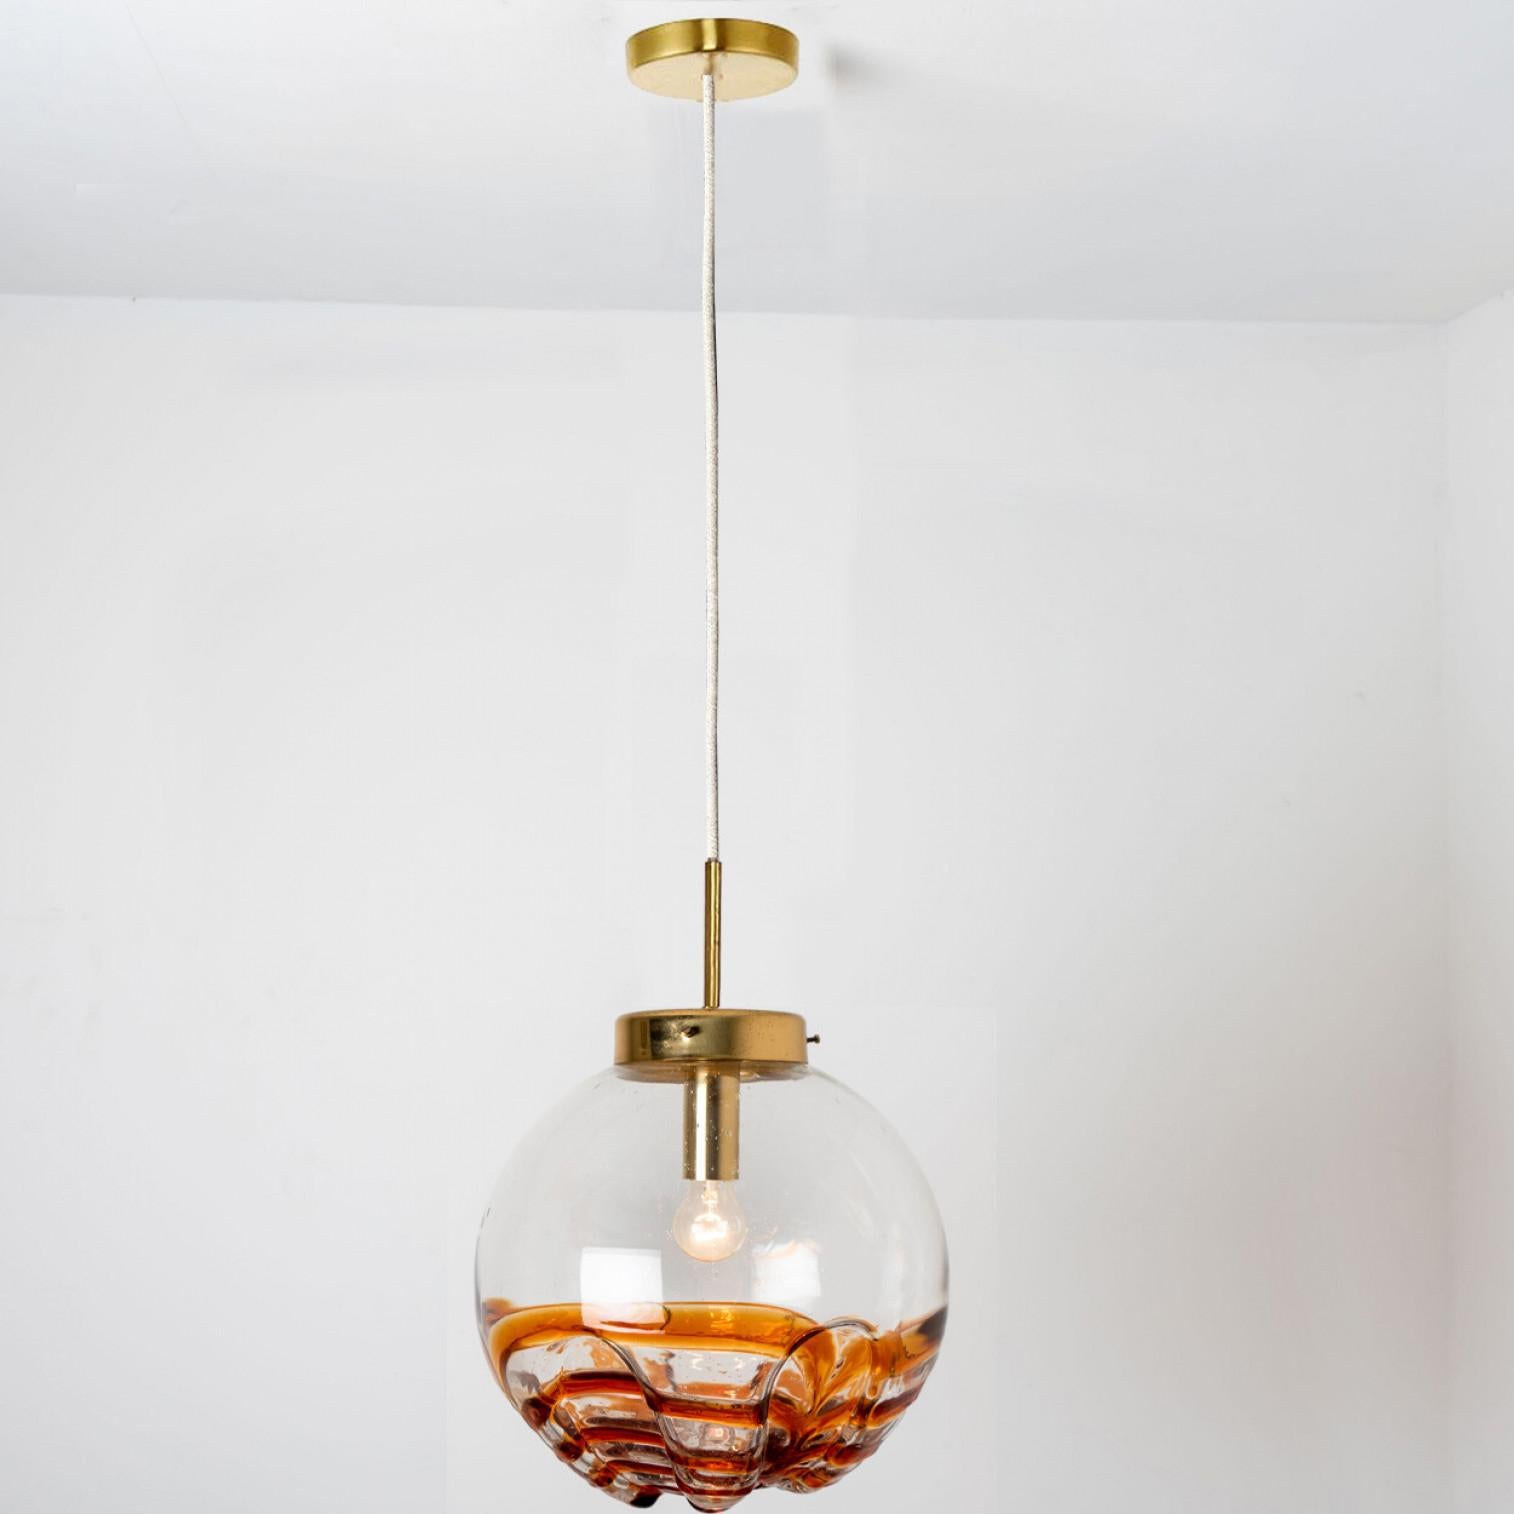 1 of 3 Mixed Colored Glass Pendant Lights, Germany, 1960s For Sale 3